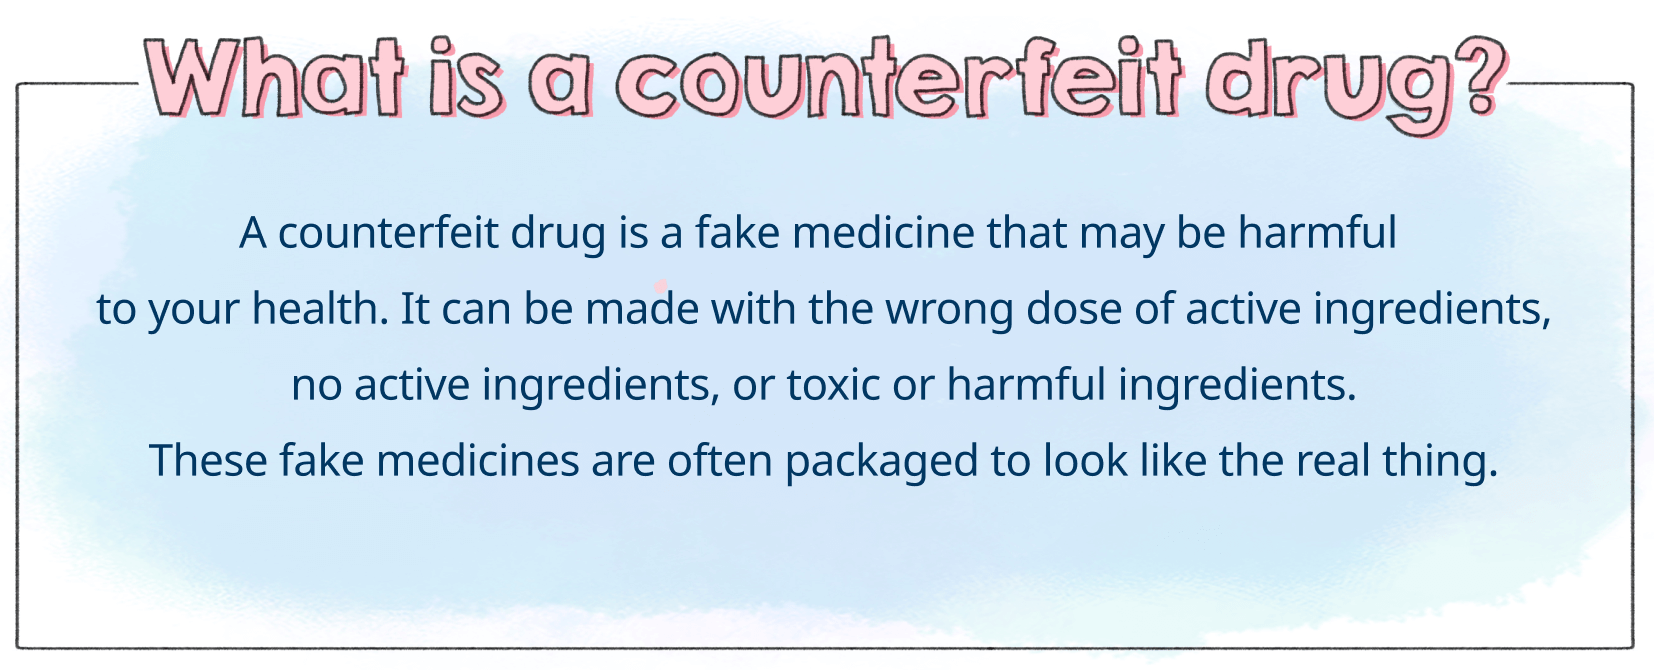 What is a counterfeit drug?